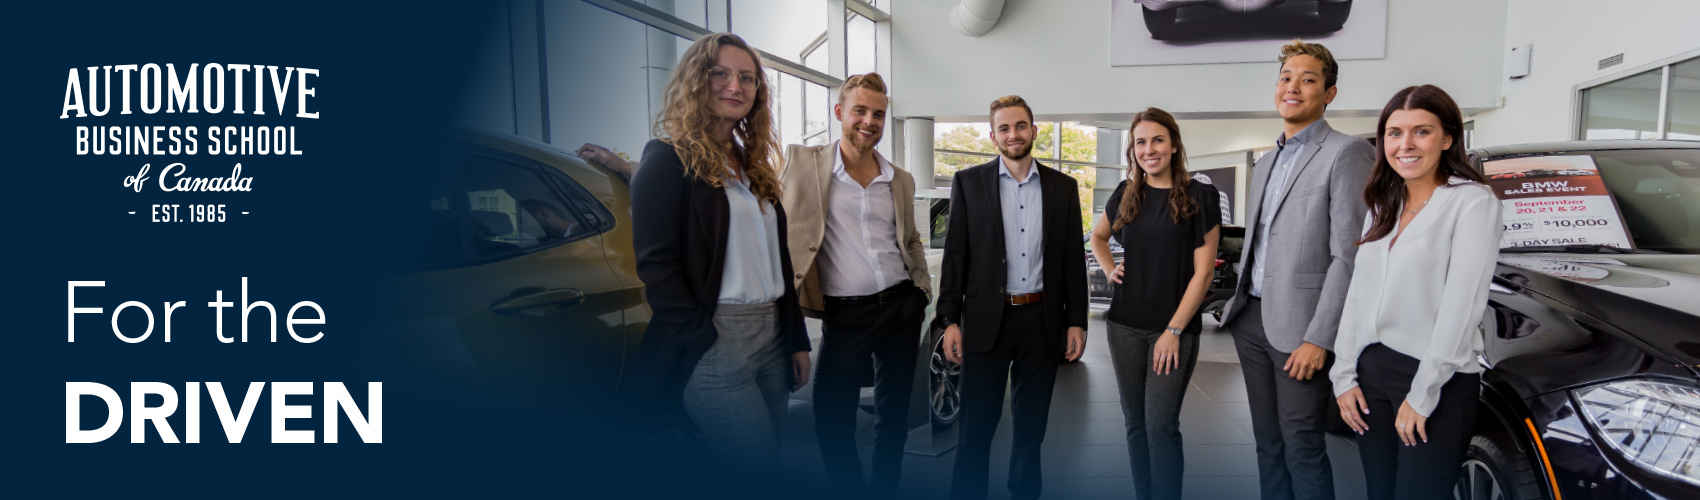 Automotive Business School of Canada at Georgian College: For the driven